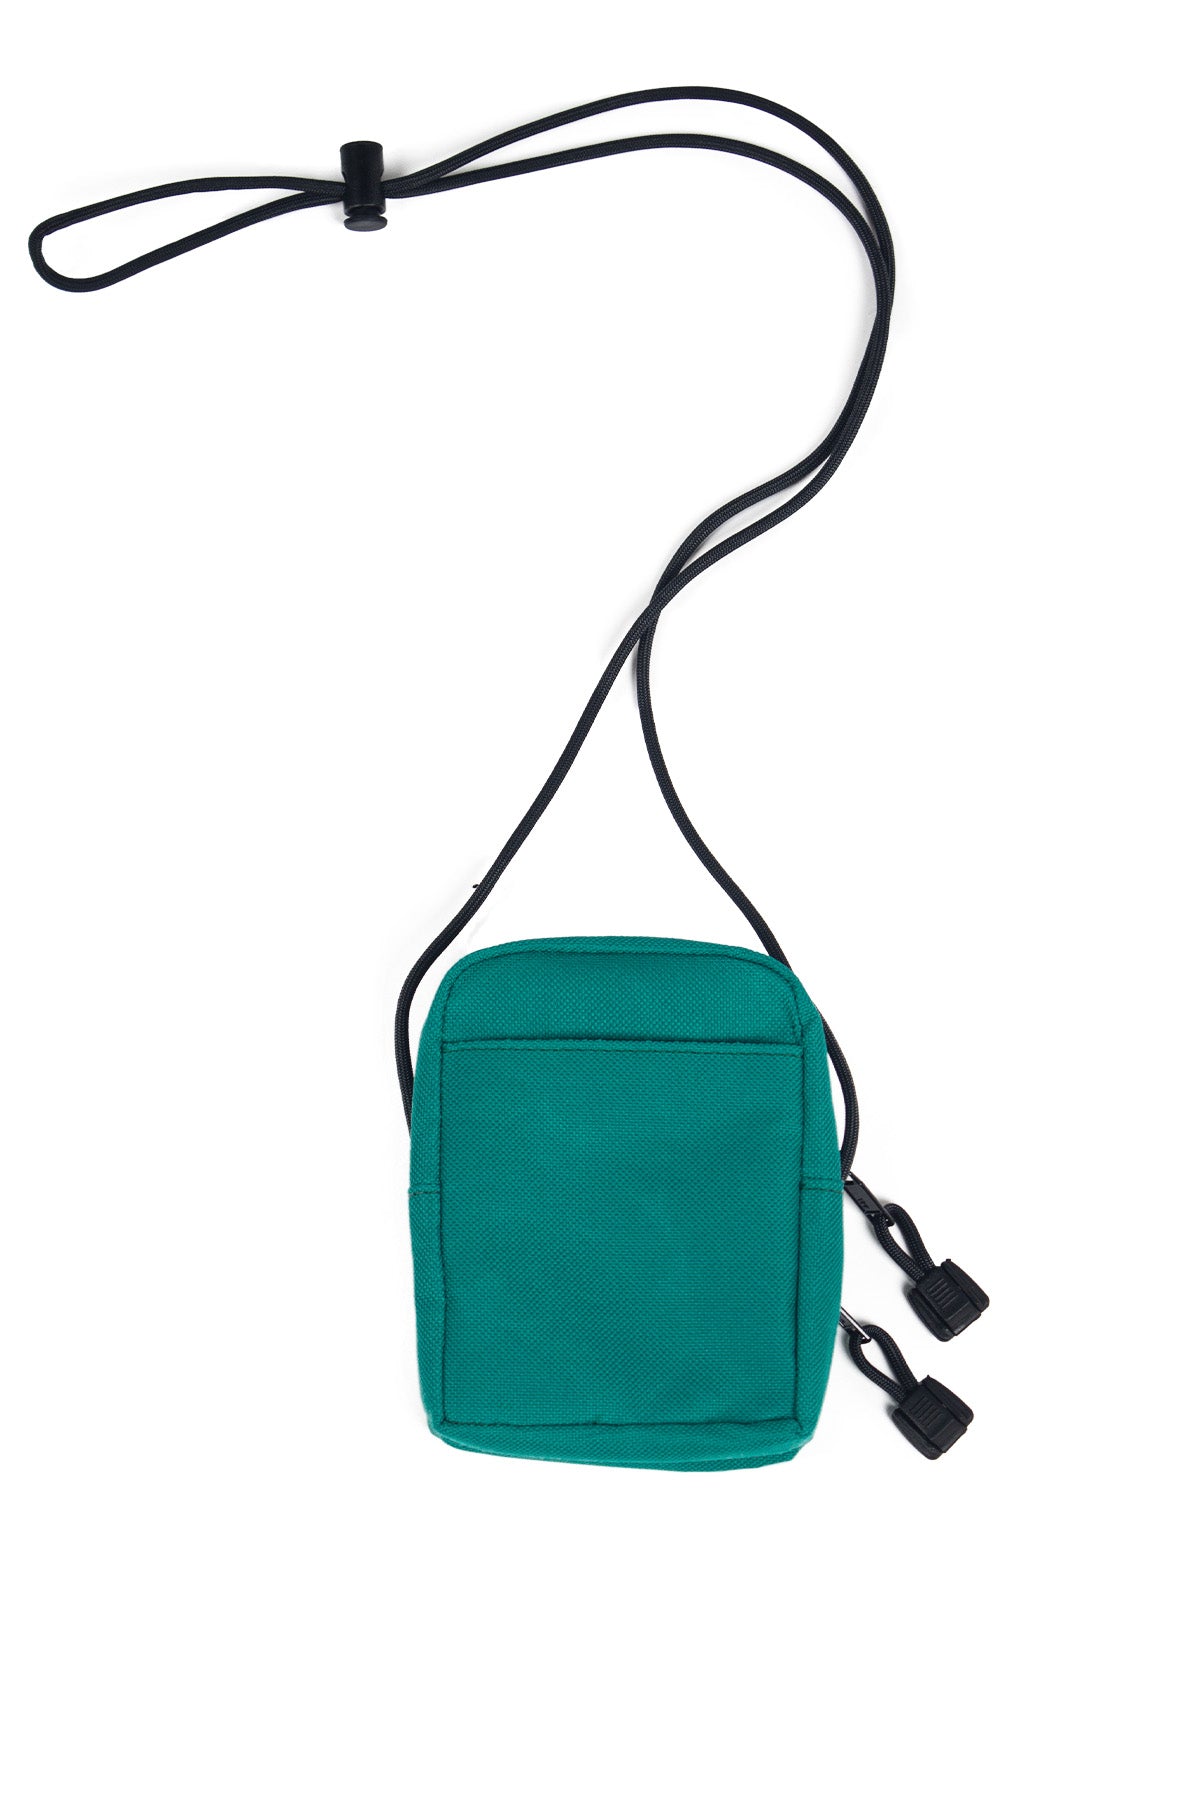 LOST MARY Green Apple Vape Pouch Bag Teal